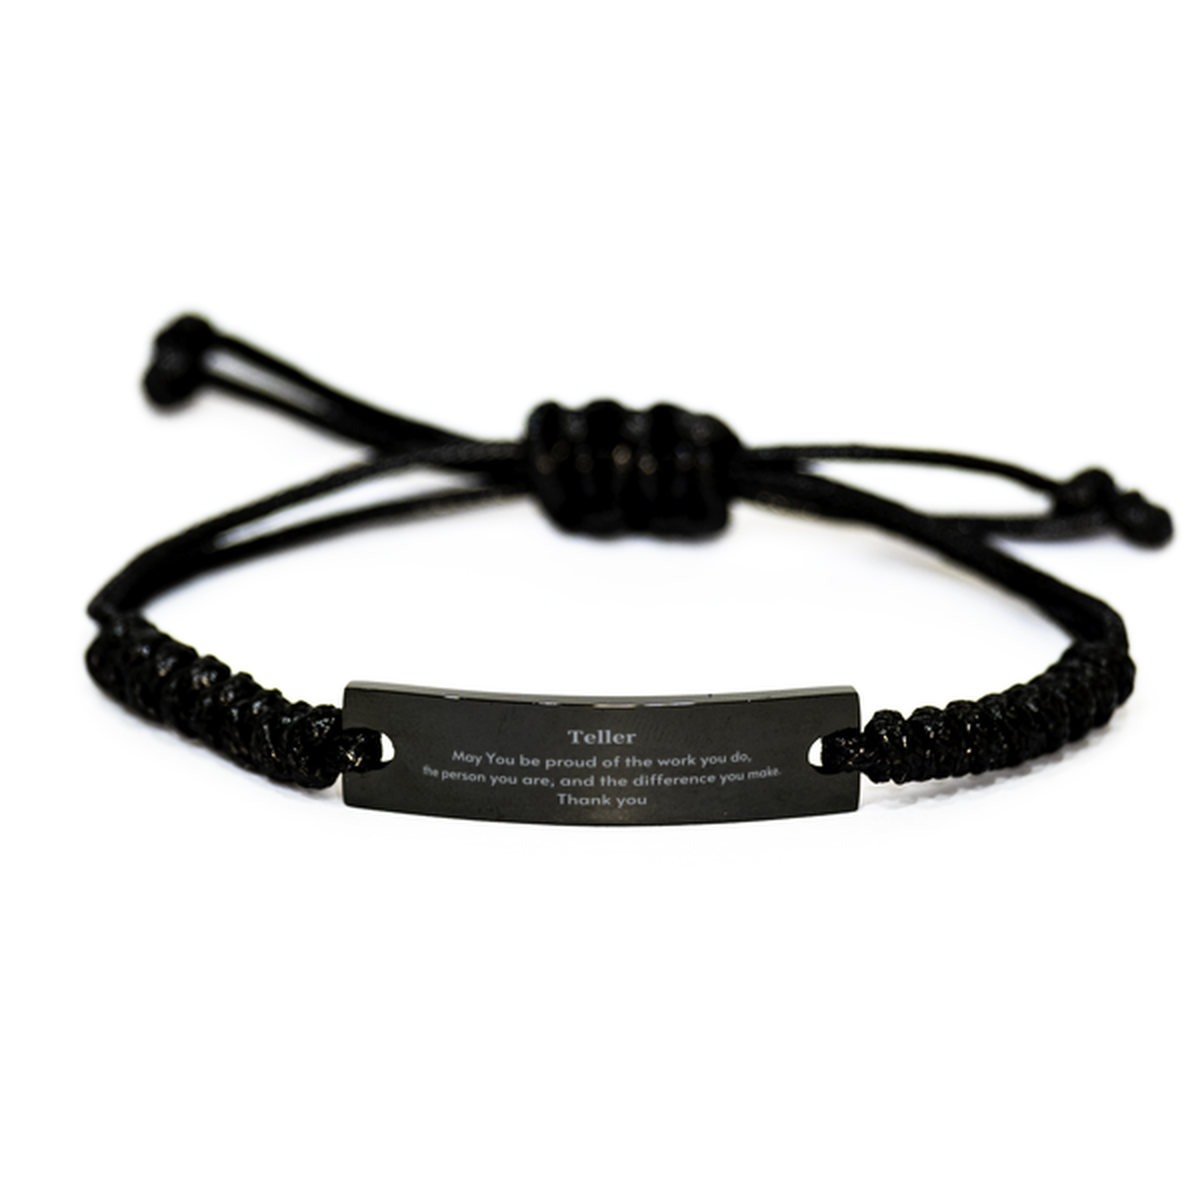 Heartwarming Black Rope Bracelet Retirement Coworkers Gifts for Teller, Teller May You be proud of the work you do, the person you are Gifts for Boss Men Women Friends